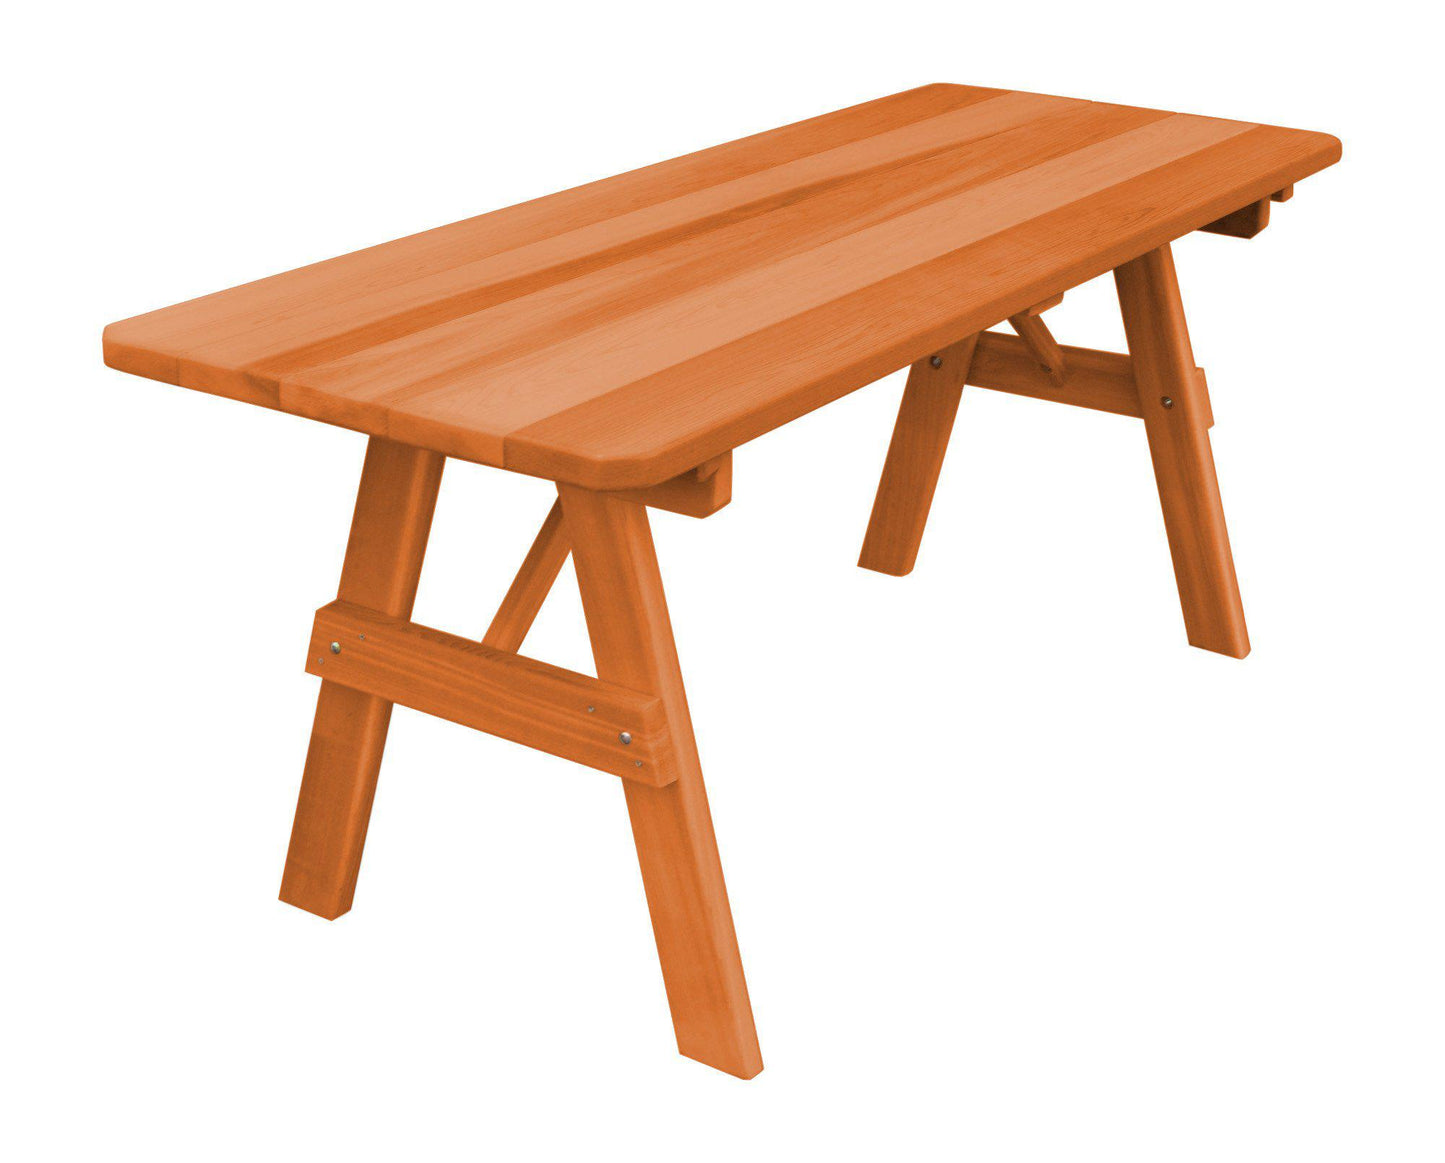 A&L FURNITURE CO. Western Red Cedar 55" Traditional Table Only - Specify for FREE 2" Umbrella Hole - LEAD TIME TO SHIP 2 WEEKS